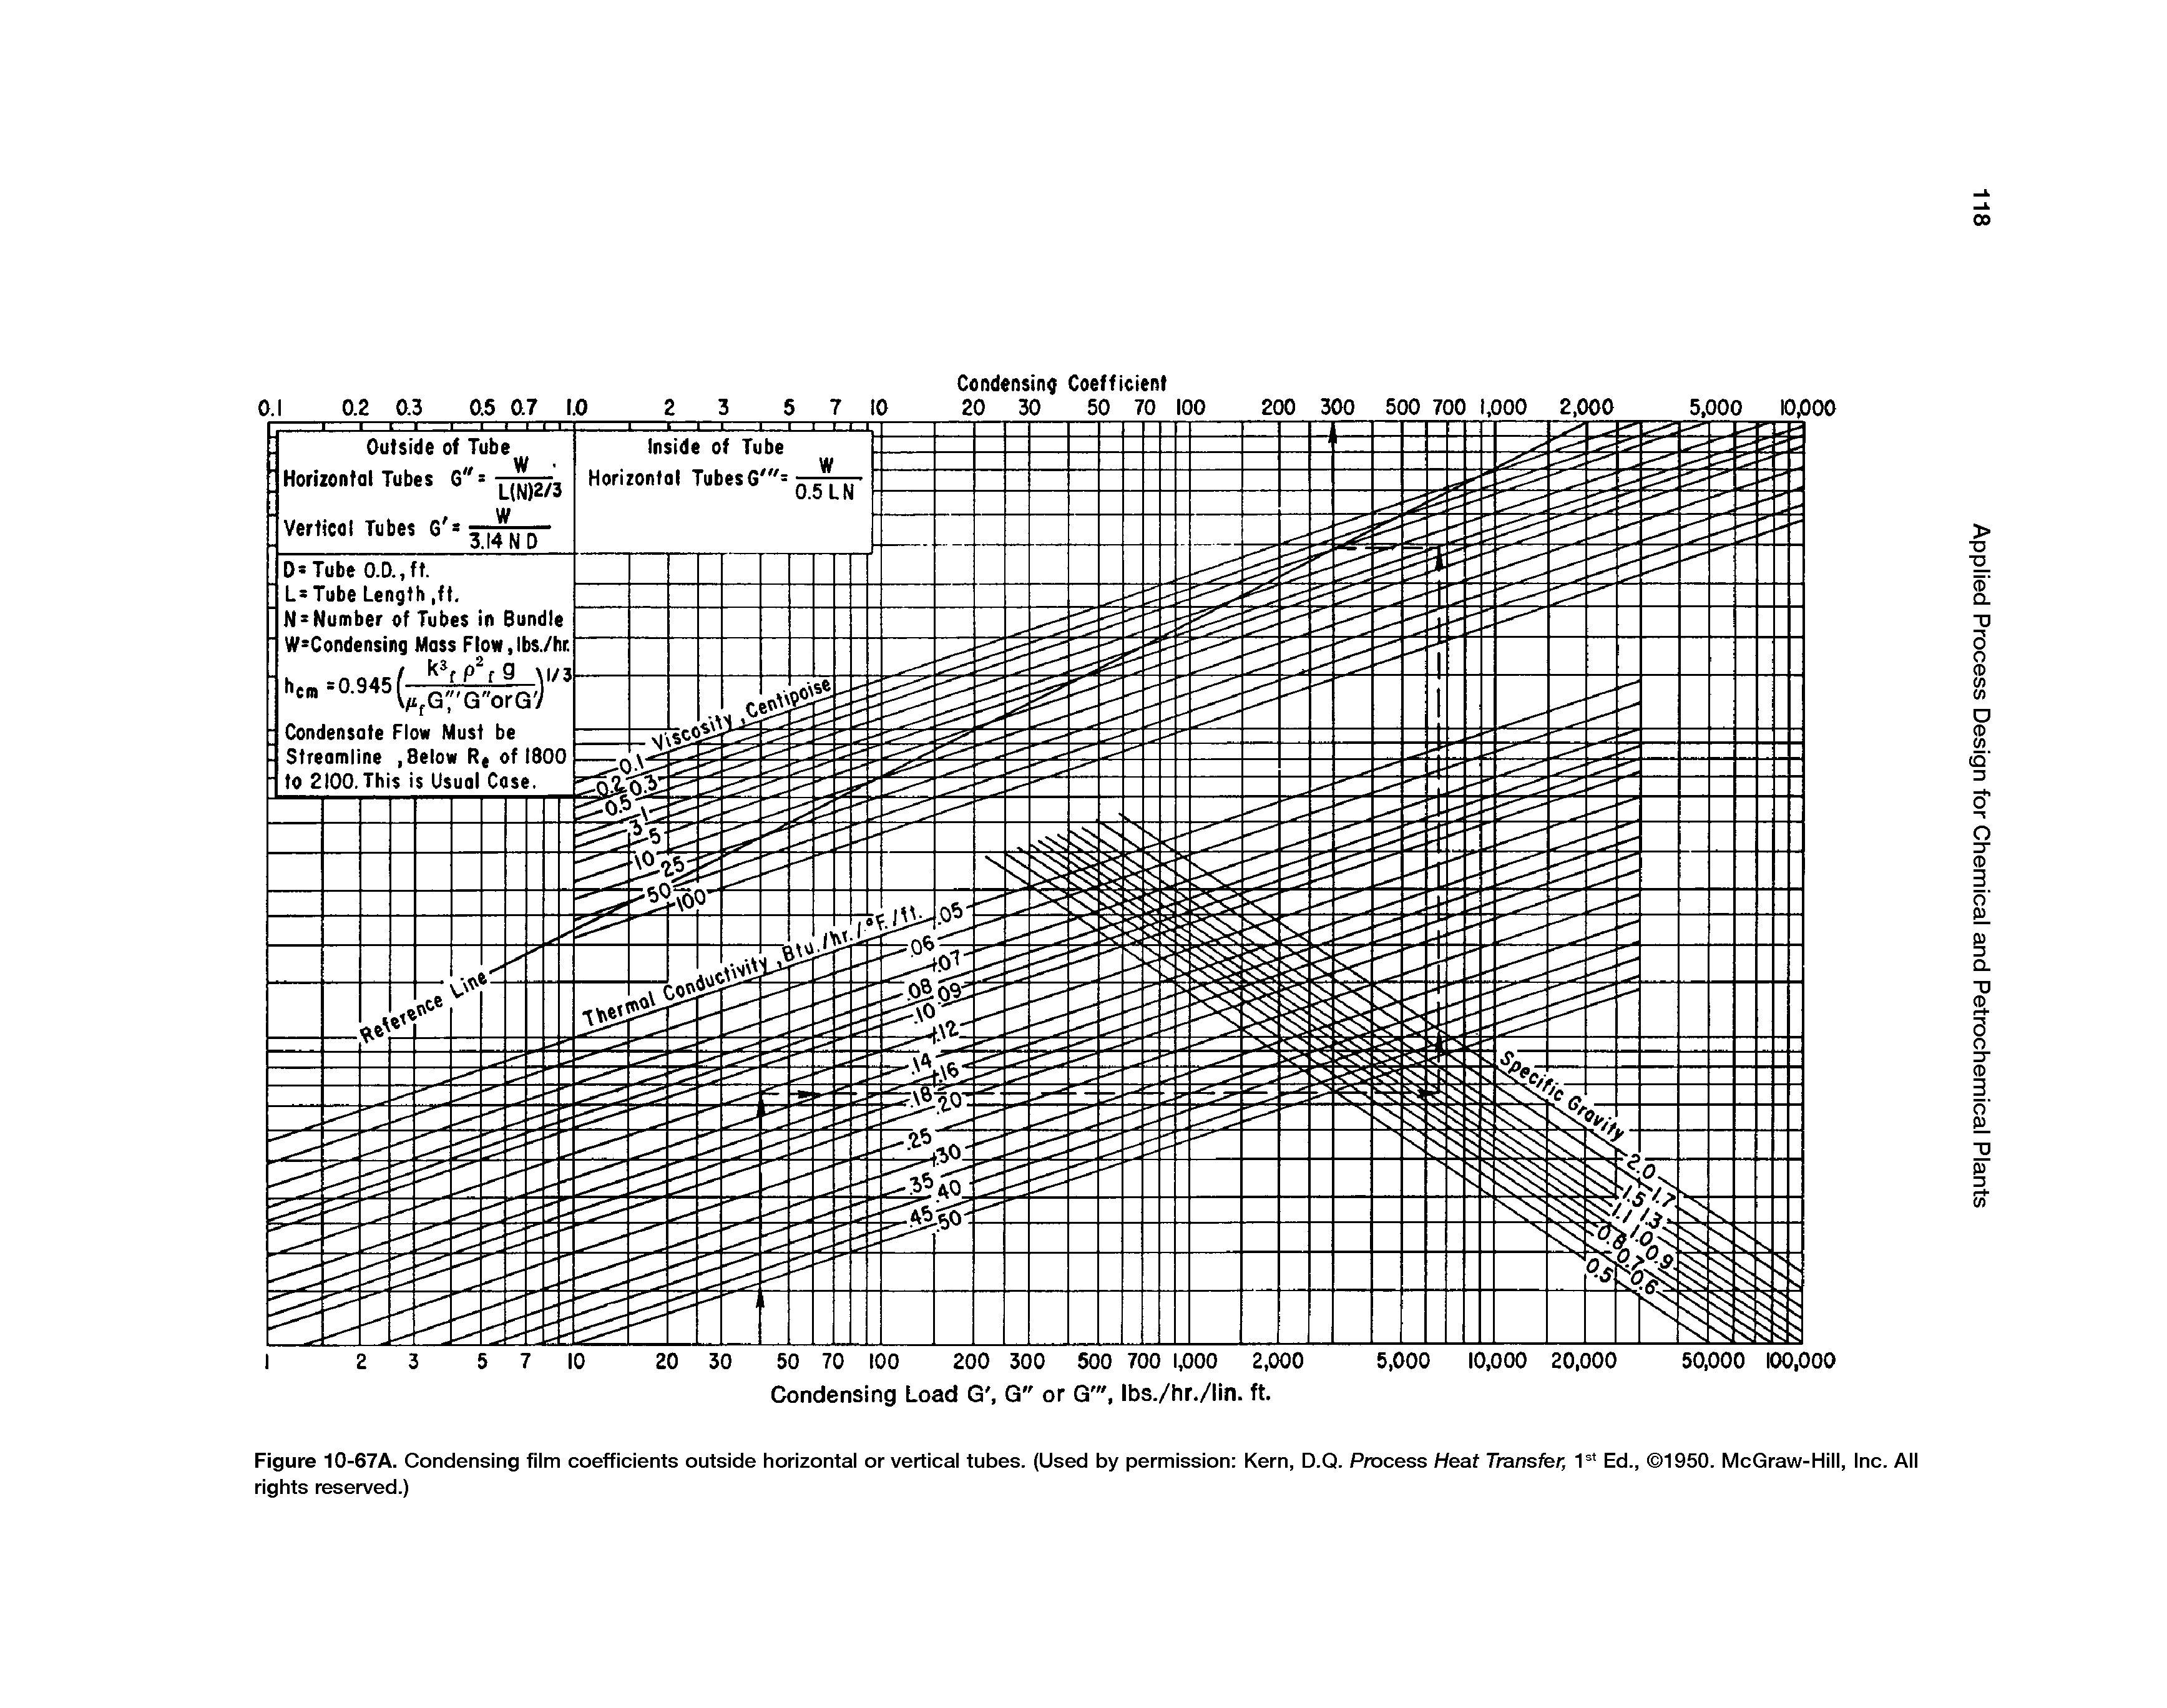 Figure 10-67A. Condensing film coefficients outside horizontal or vertical tubes. (Used by permission Kern, D.Q. Process Heat Transfer, Ed., 1950. McGraw-Hill, Inc. All rights reserved.)...